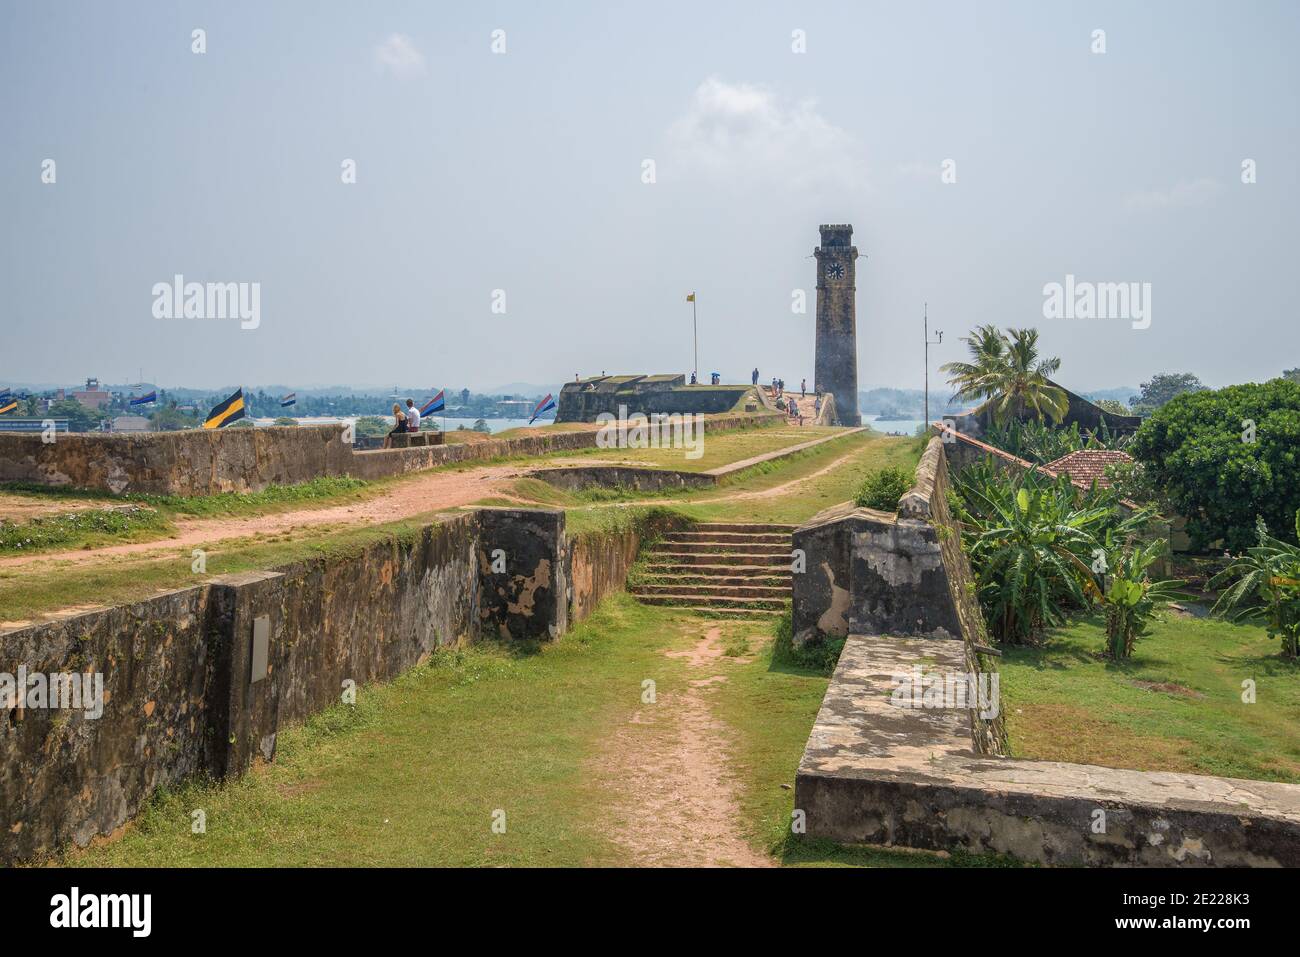 On the old bastions of an ancient Dutch fortress. Galle, Sri Lanka Stock Photo